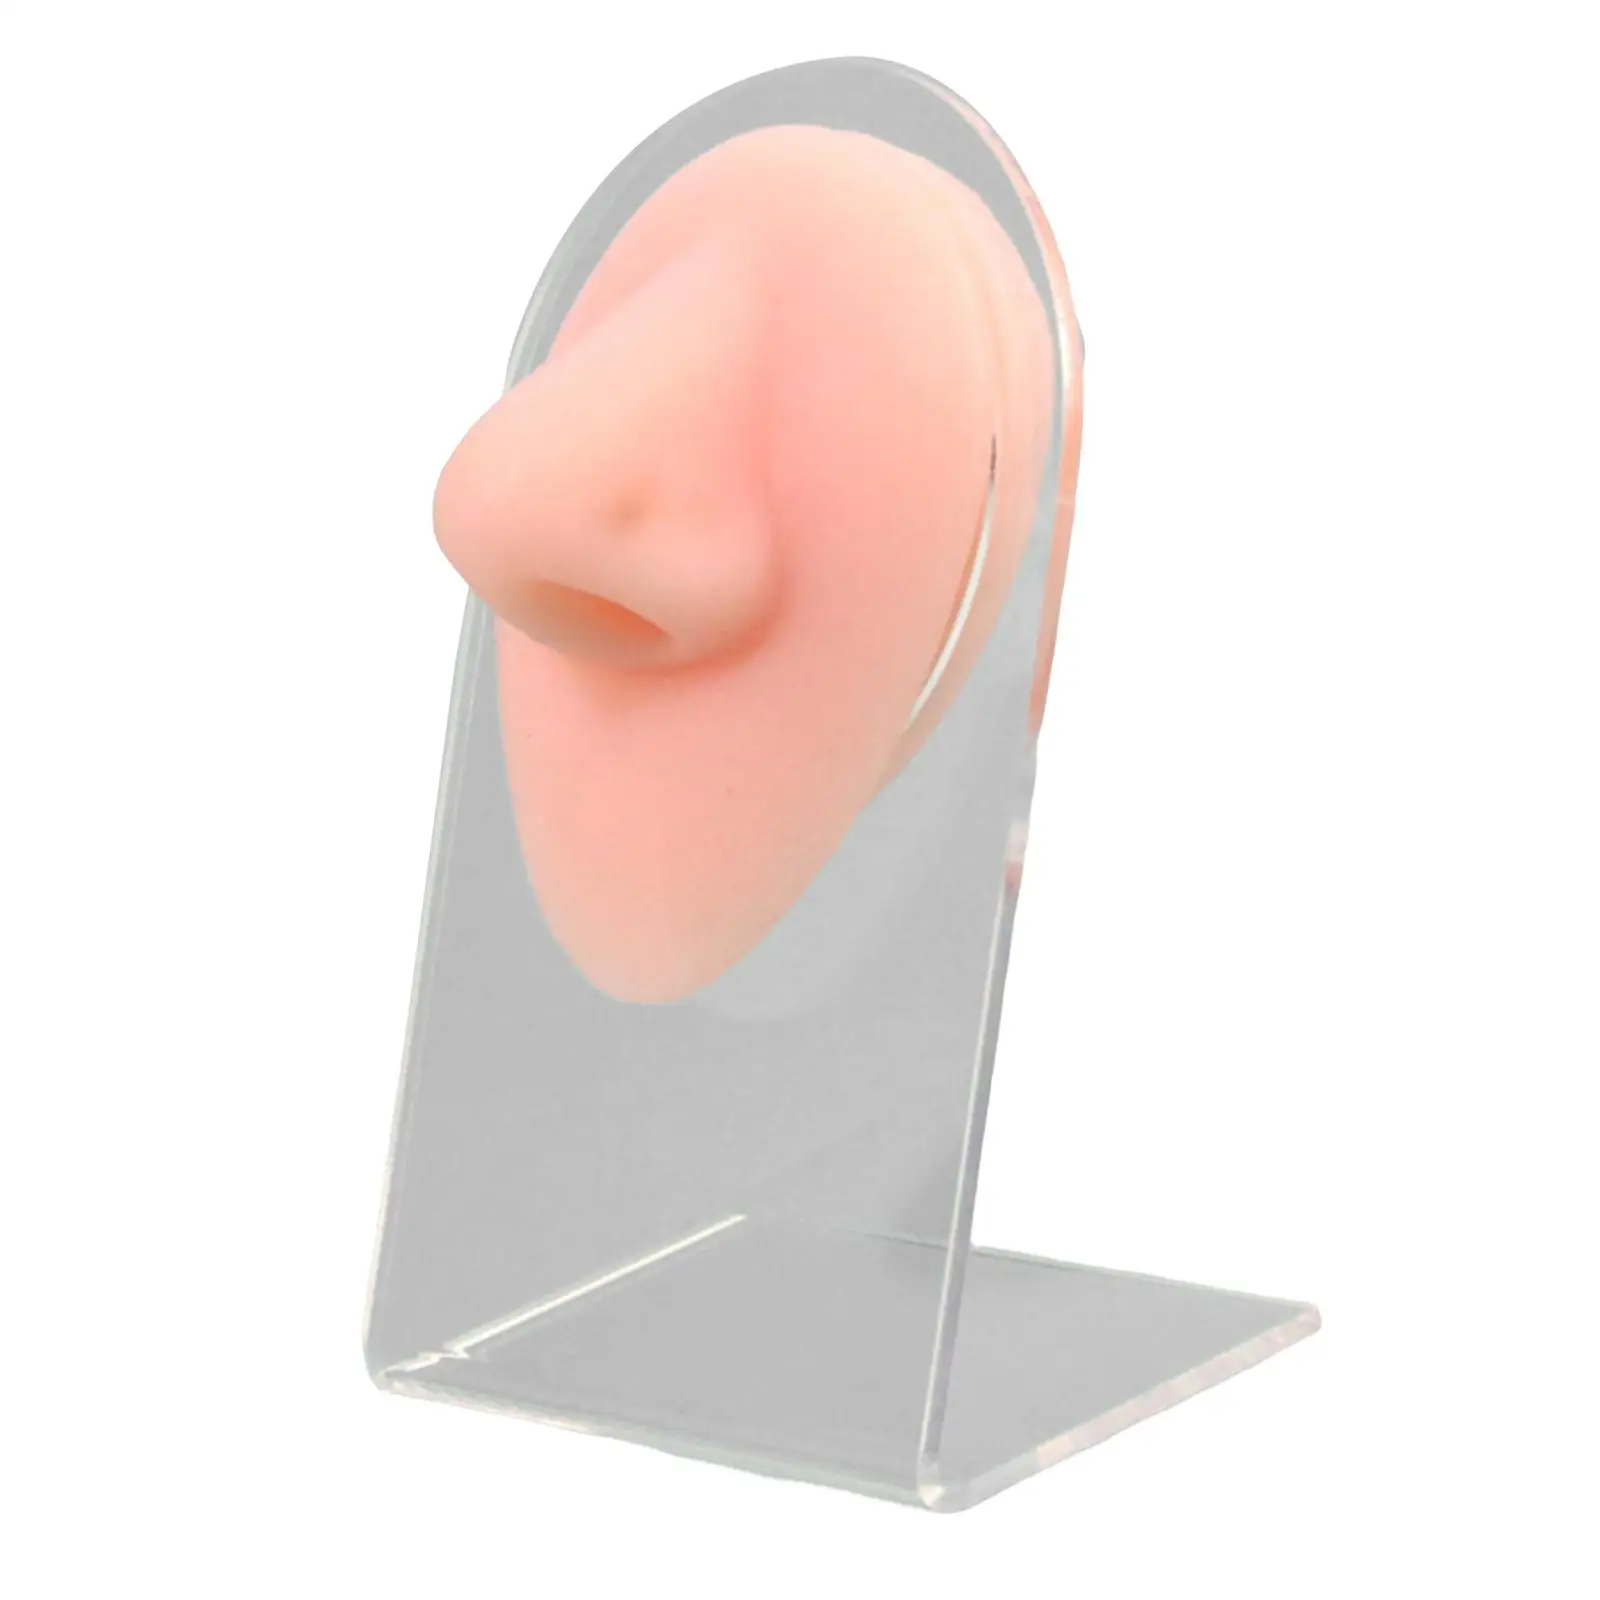 Nose Model Display Silicone with Rack Multipurpose Professional for Jewelry